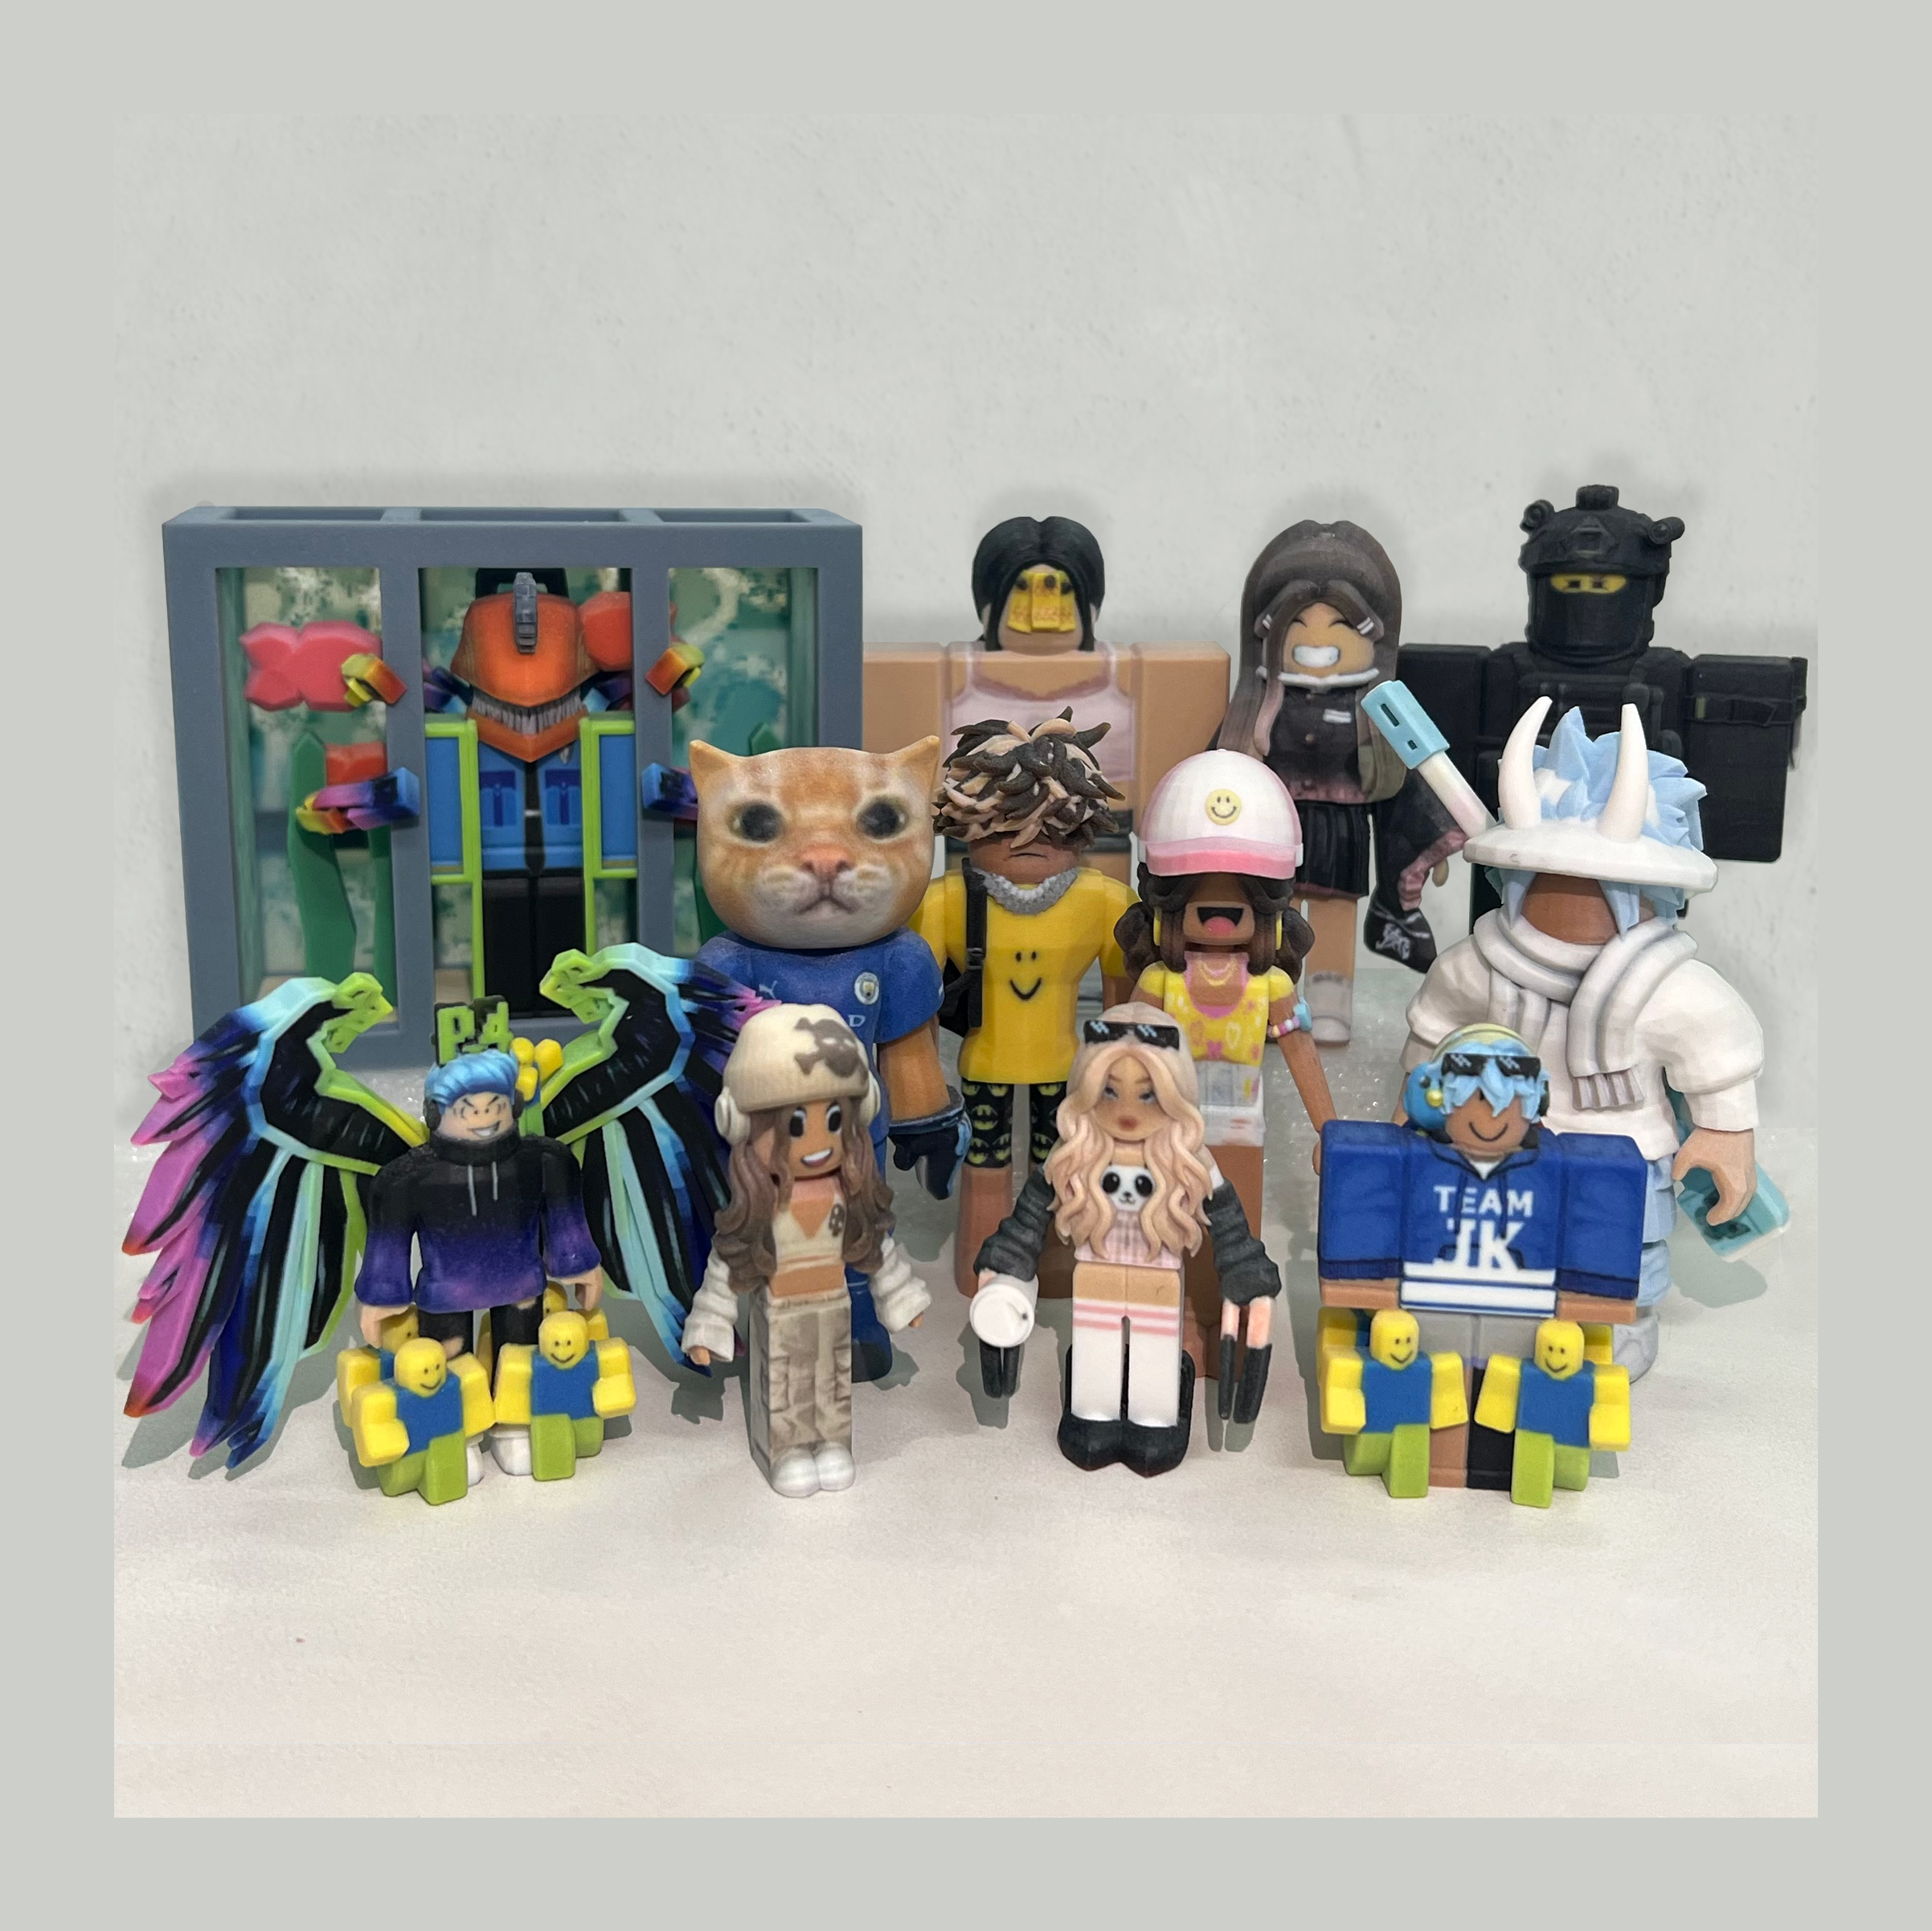  Roblox Celebrity Collection - Series 4 Figure 12pk